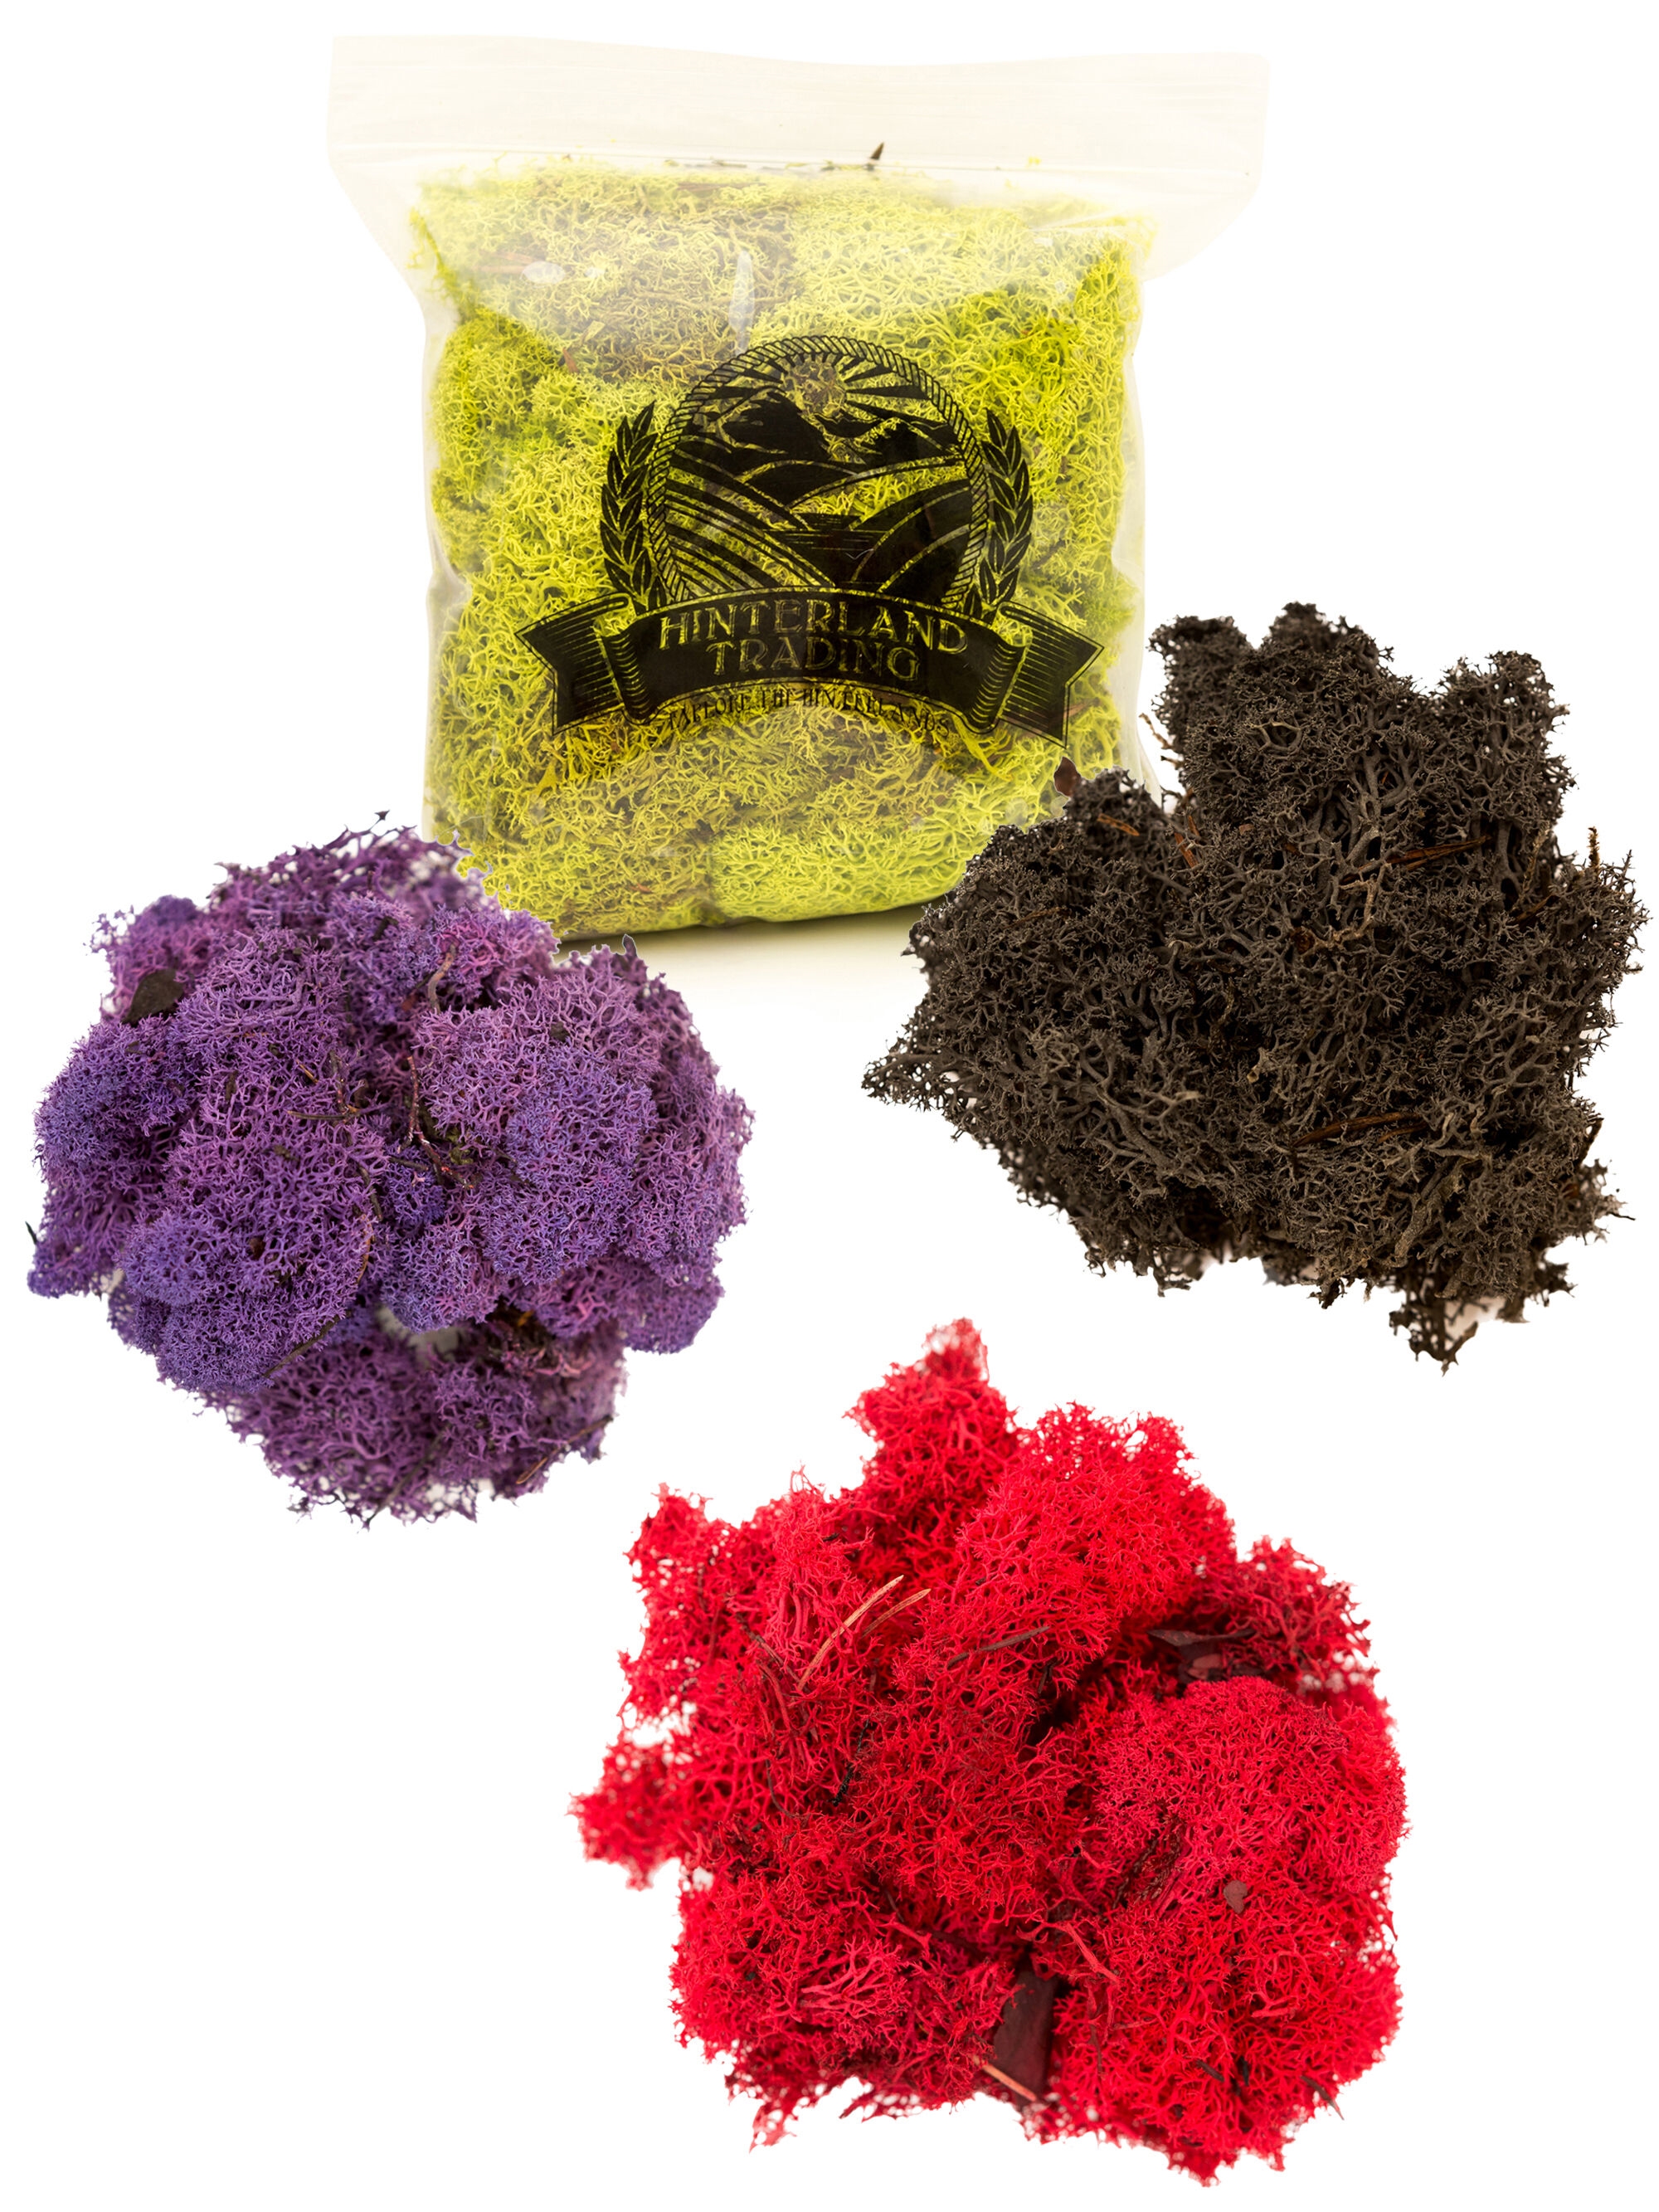  Fuchsia Colored Preserved Reindeer Moss - 2 oz - Indoor  Outdoor for Potted Plants, Terrariums, Fairy Gardens, Arts and Crafts or  Floral Decor Design : Patio, Lawn & Garden